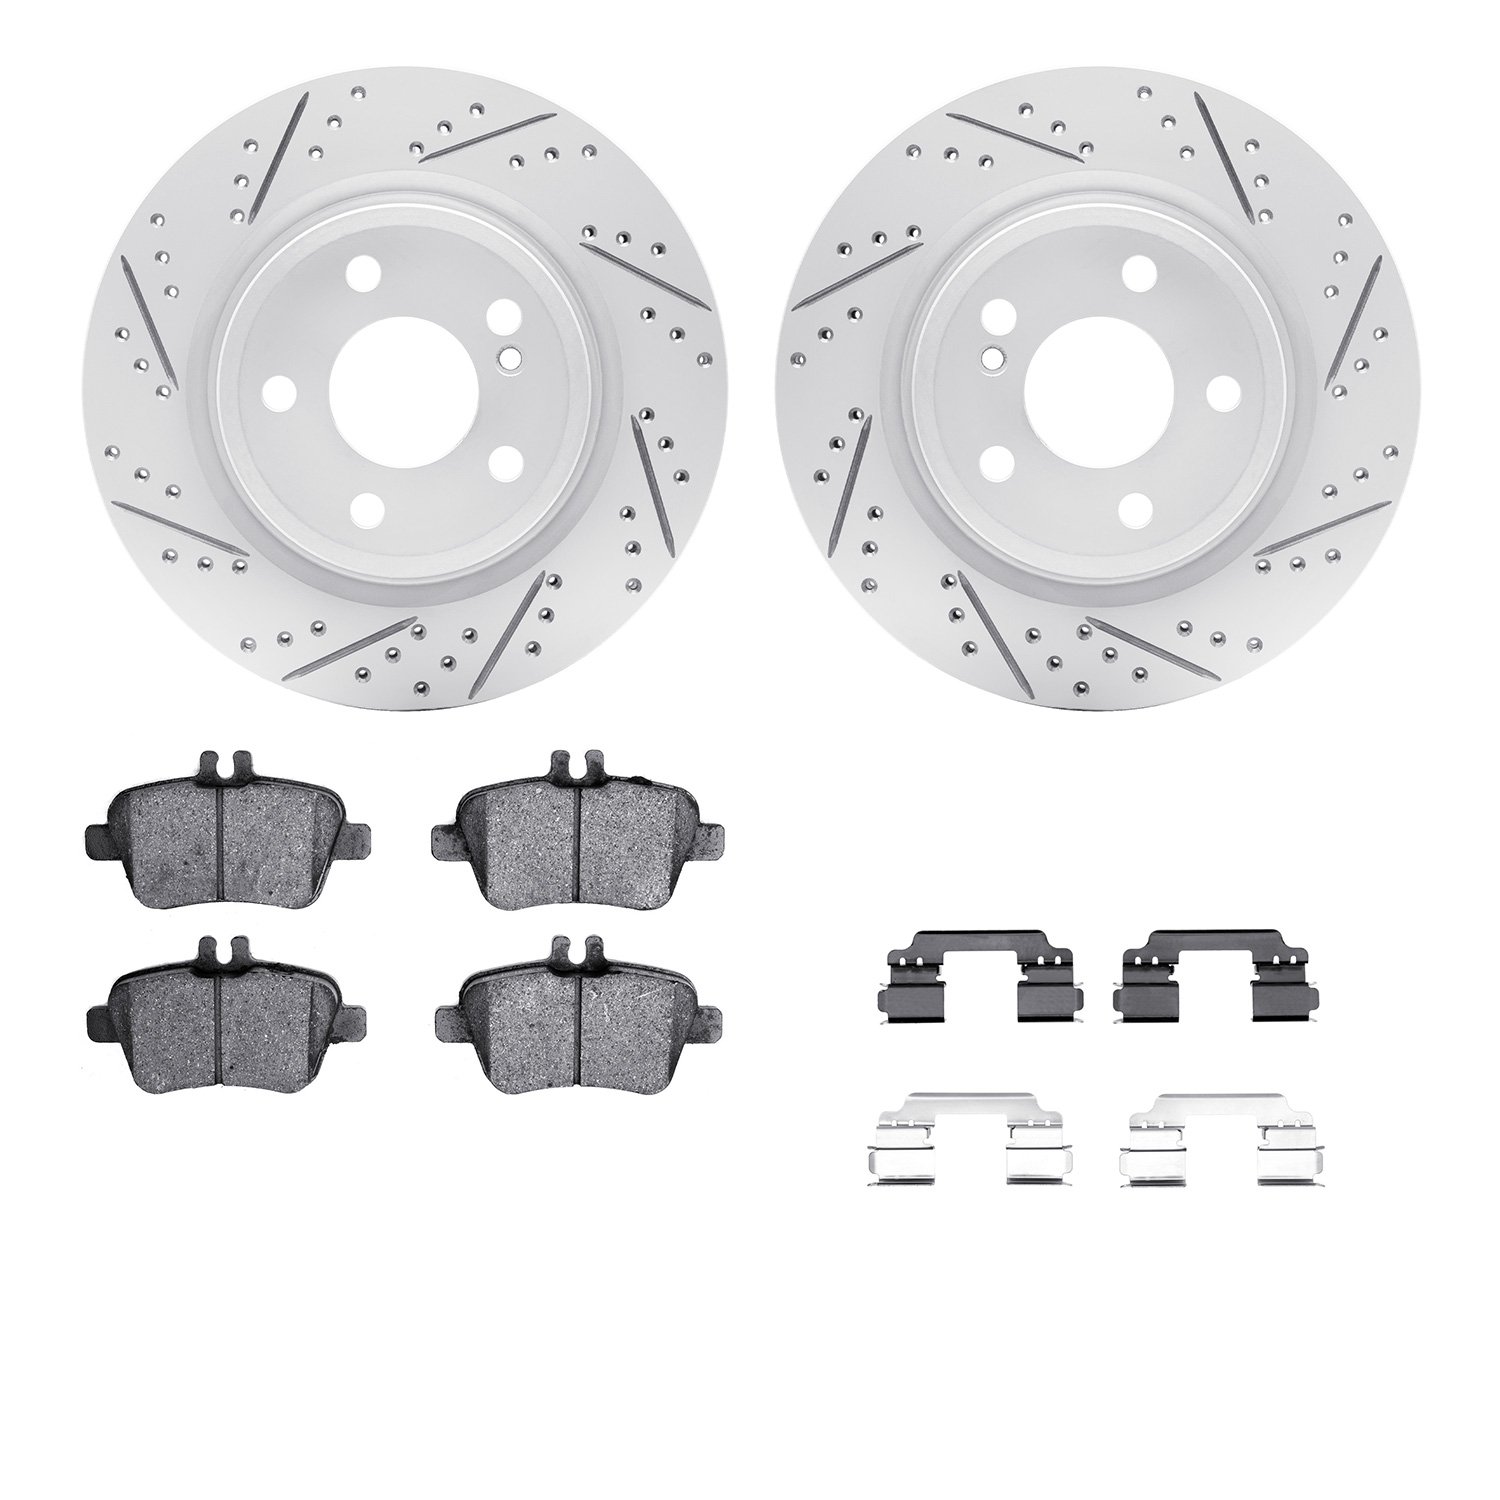 2512-63050 Geoperformance Drilled/Slotted Rotors w/5000 Advanced Brake Pads Kit & Hardware, 2014-2019 Mercedes-Benz, Position: R